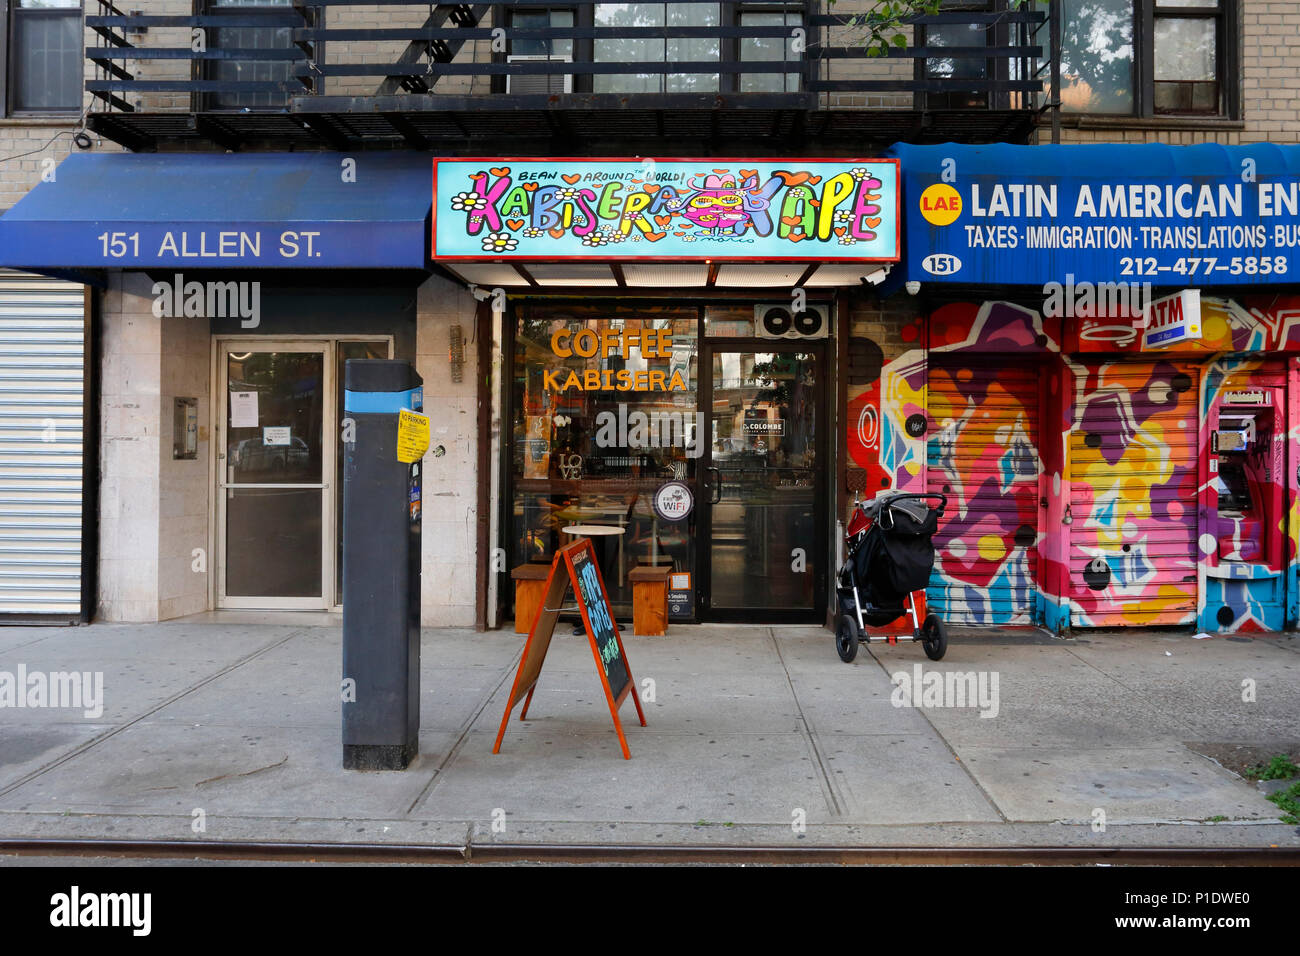 [historical storefront] Kabisera Kape, 151 Allen St, New York, NYC storefront image of a Filipino cafe in Manhattan's Lower East Side. Stock Photo